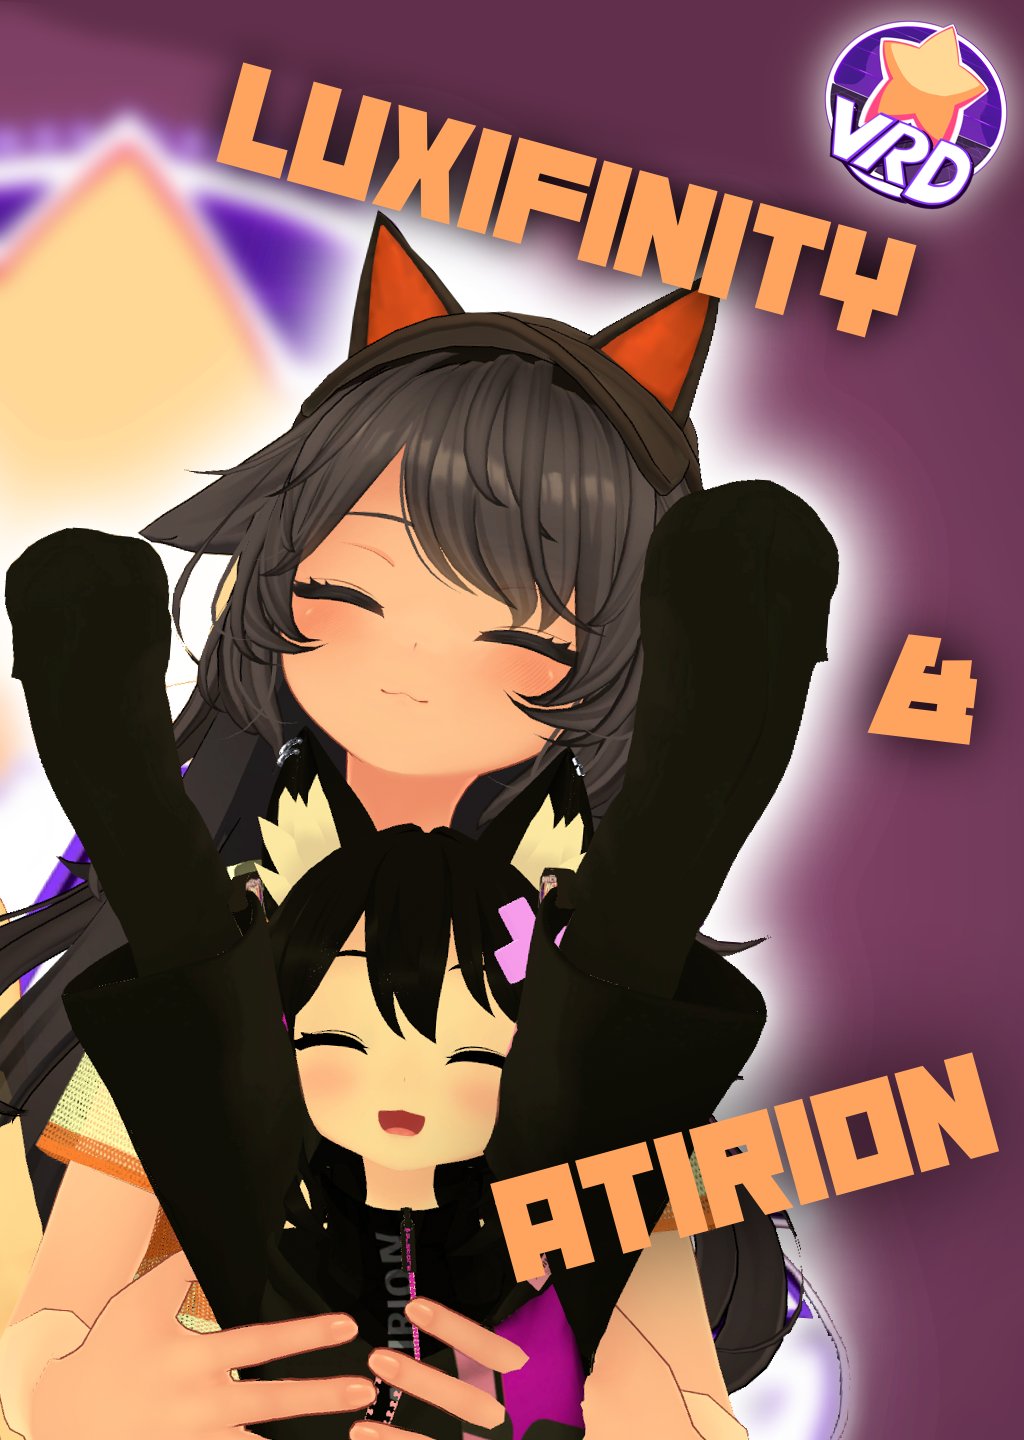 I always get excited for Vket when it comes around! : r/VRchat